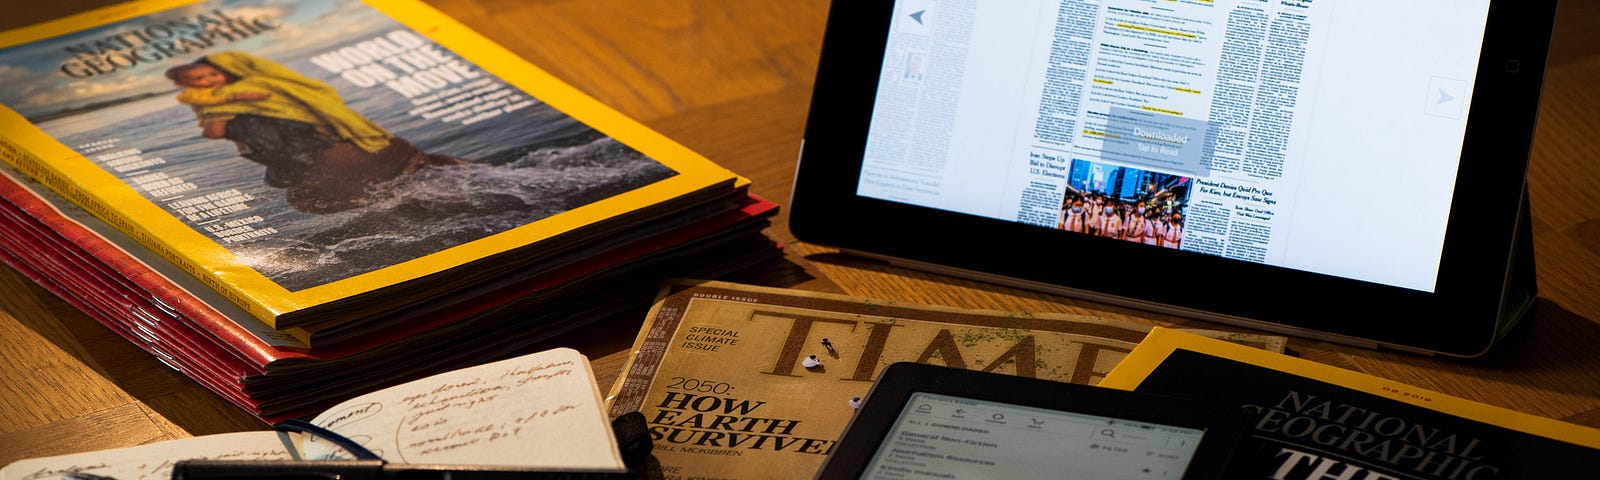 Display of magazines and newspapers, in print and digital, along with a Kindle and a pocket notebook and pens on a desk.